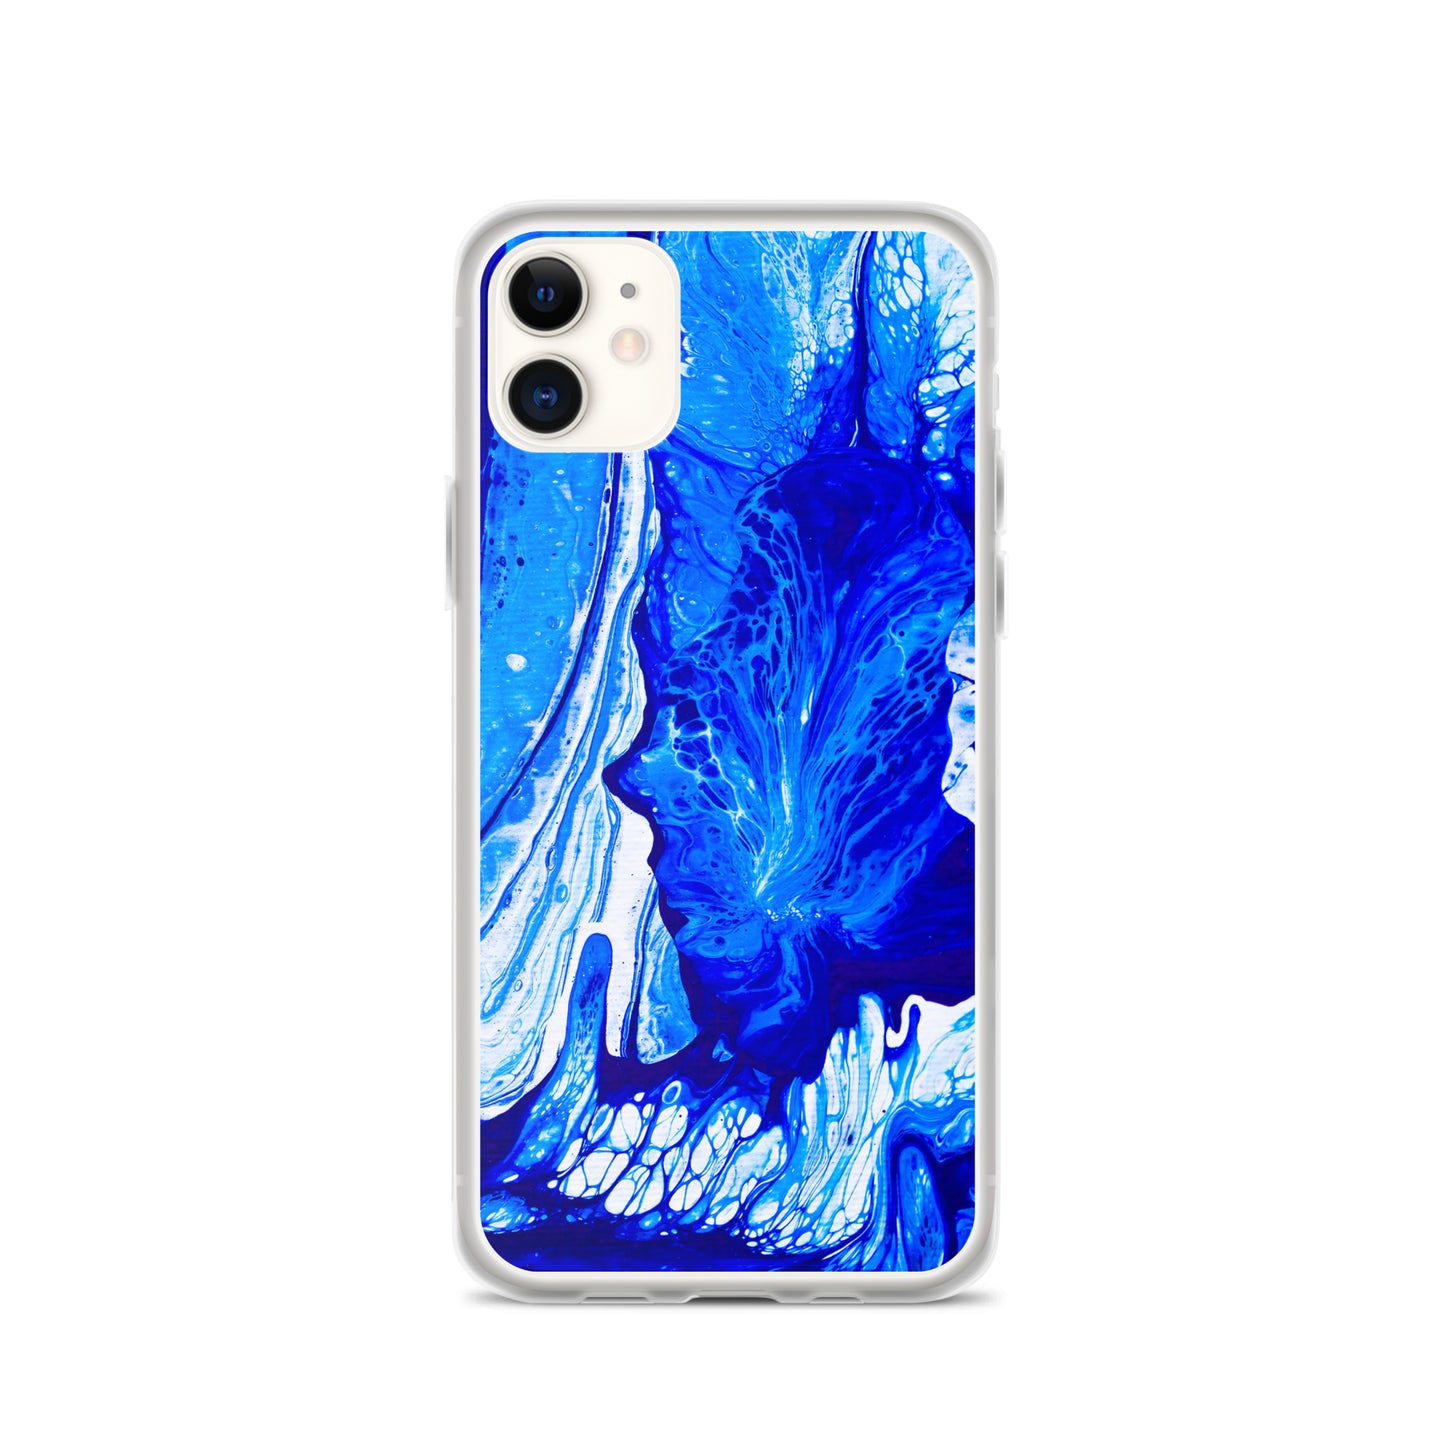 NightOwl Studio Custom Phone Case Compatible with iPhone, Ultra Slim Cover with Heavy Duty Scratch Resistant Shockproof Protection, Ms. Blue